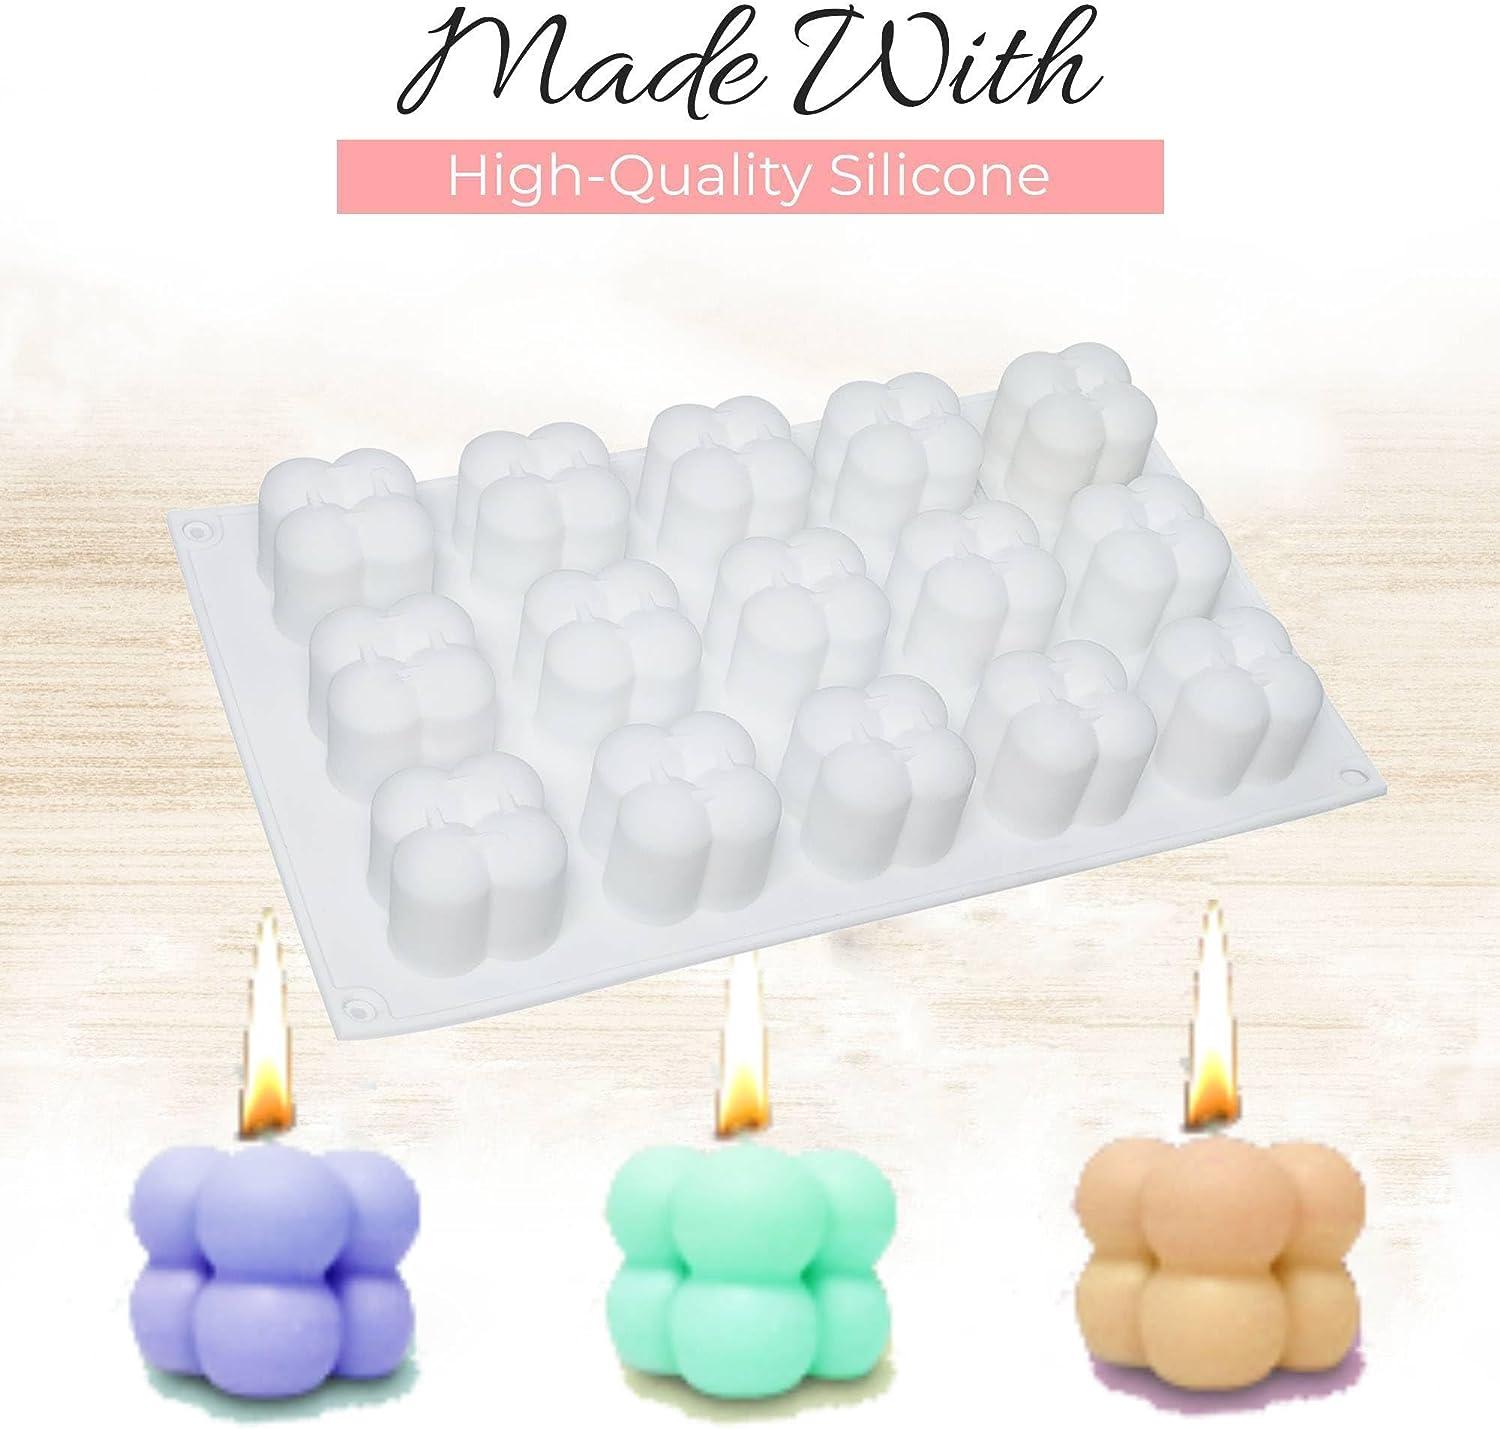 Wax Melts & Molds – Candles by Candie, LLC